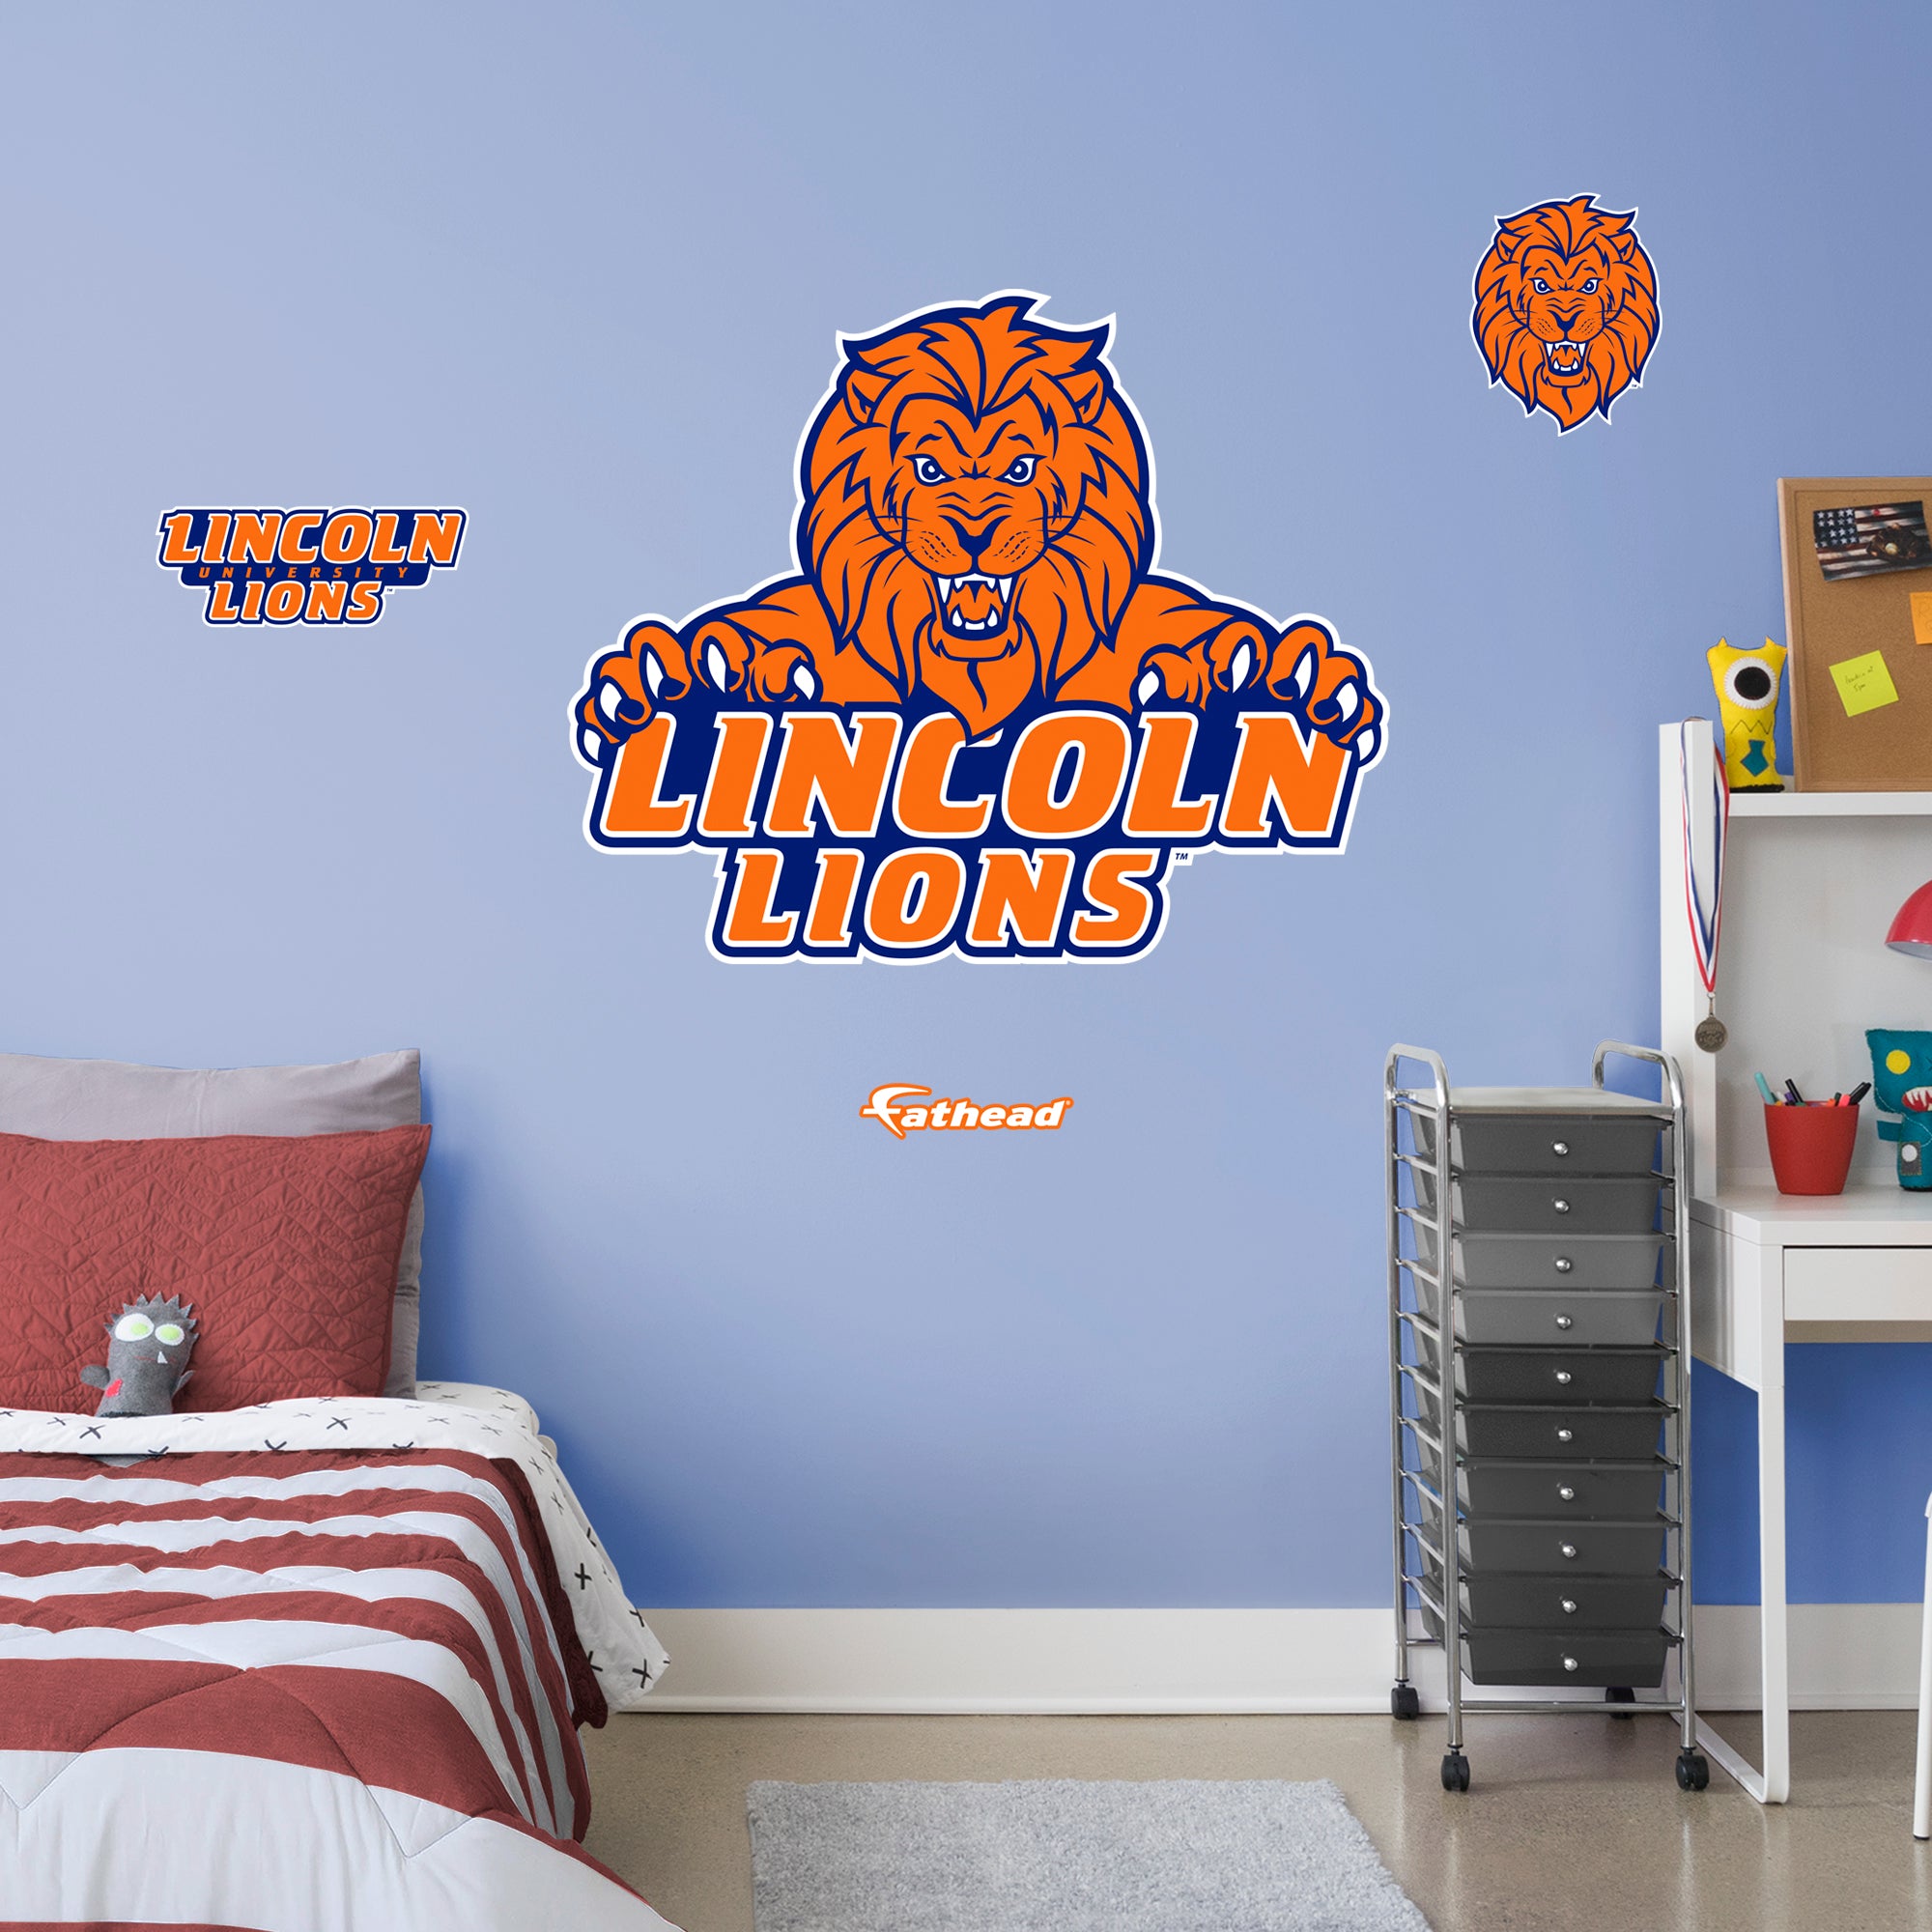 Lincoln University 2020 RealBig - Officially Licensed NCAA Removable Wall Decal Giant Decal (38"W x 47"H) by Fathead | Vinyl